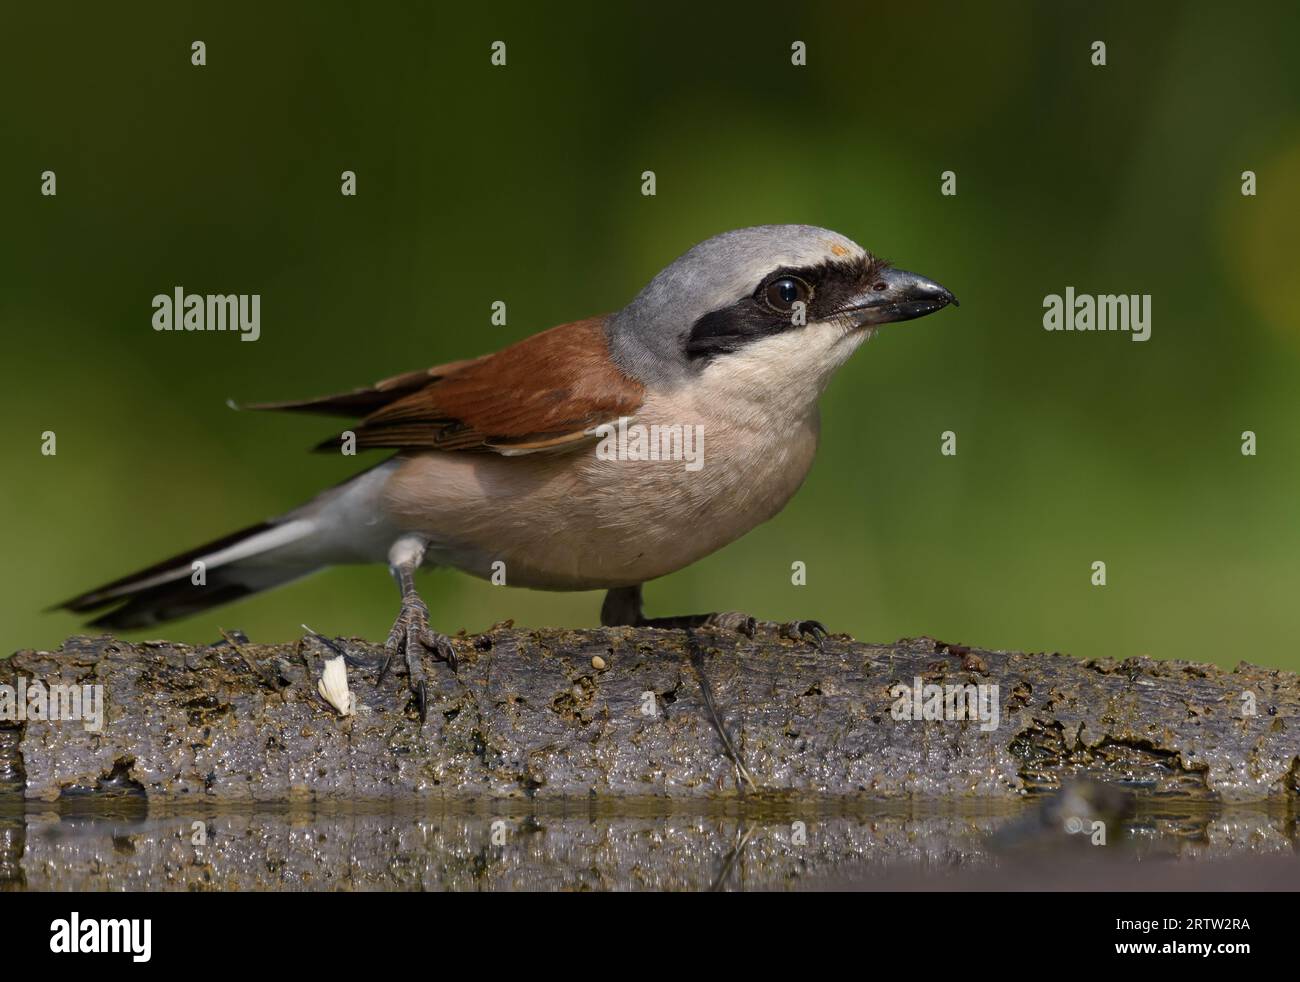 Male Red-backed shrike (Lanius collurio) crawling at the fallen branch with deep green background Stock Photo